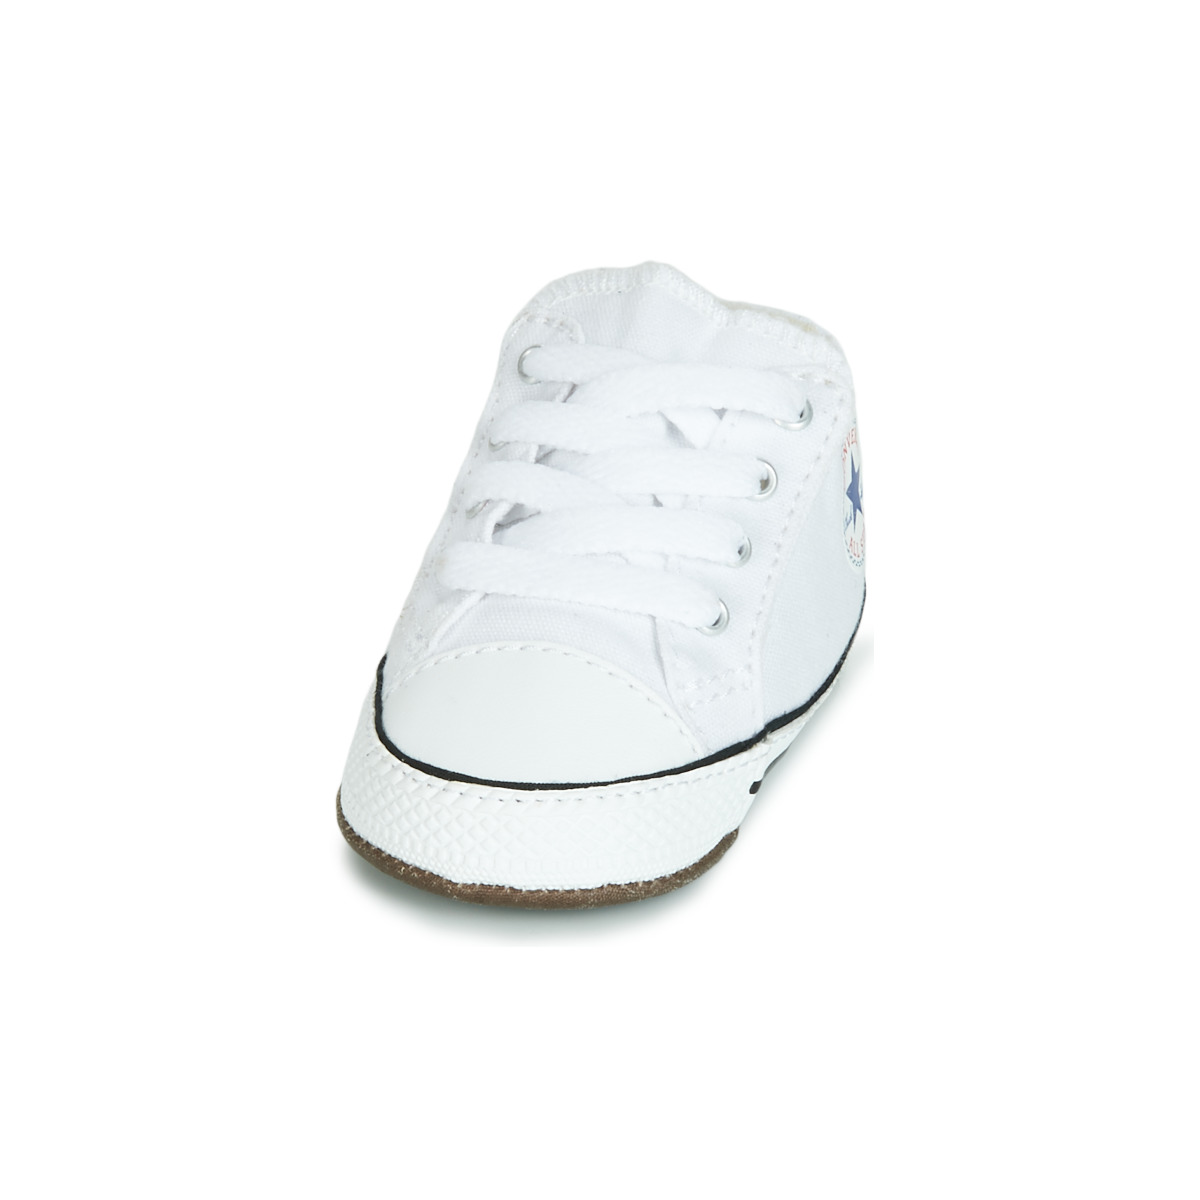 Converse Blanc Optical CHUCK TAYLOR ALL STAR CRIBSTER CANVAS COLOR MID T84LJdJT